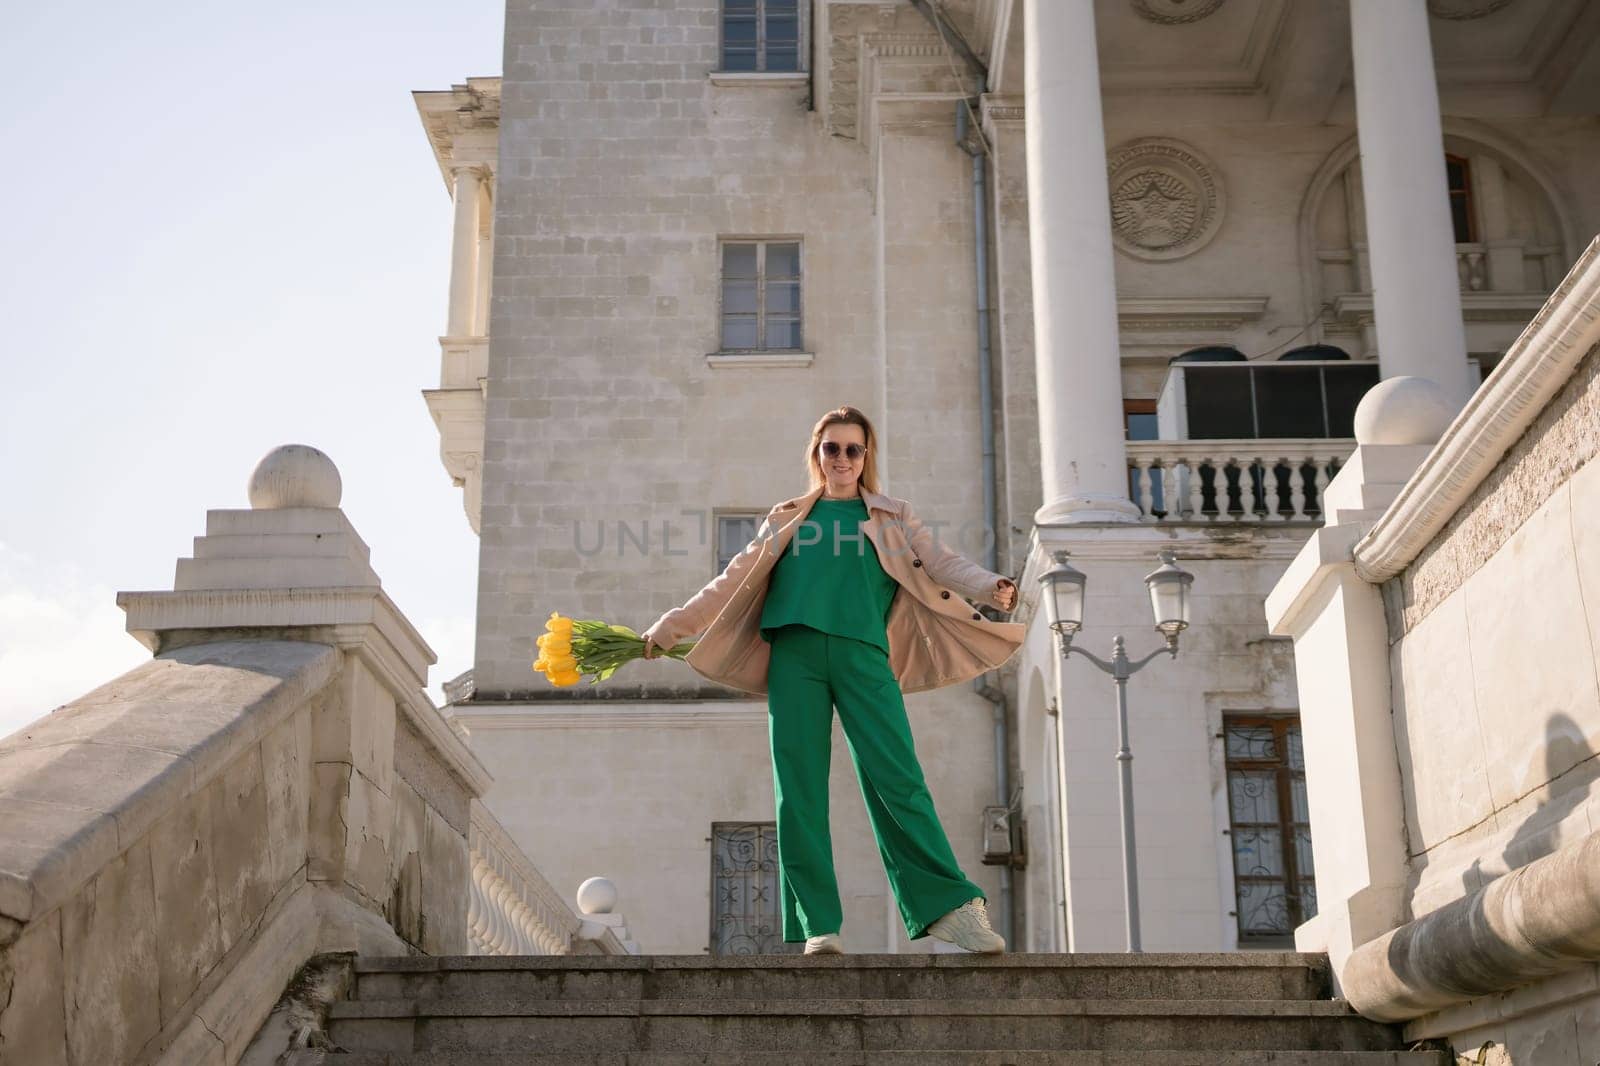 A woman in a green outfit stands on a set of stairs in front of a building. She is holding a bouquet of yellow flowers. The scene has a sense of elegance and sophistication